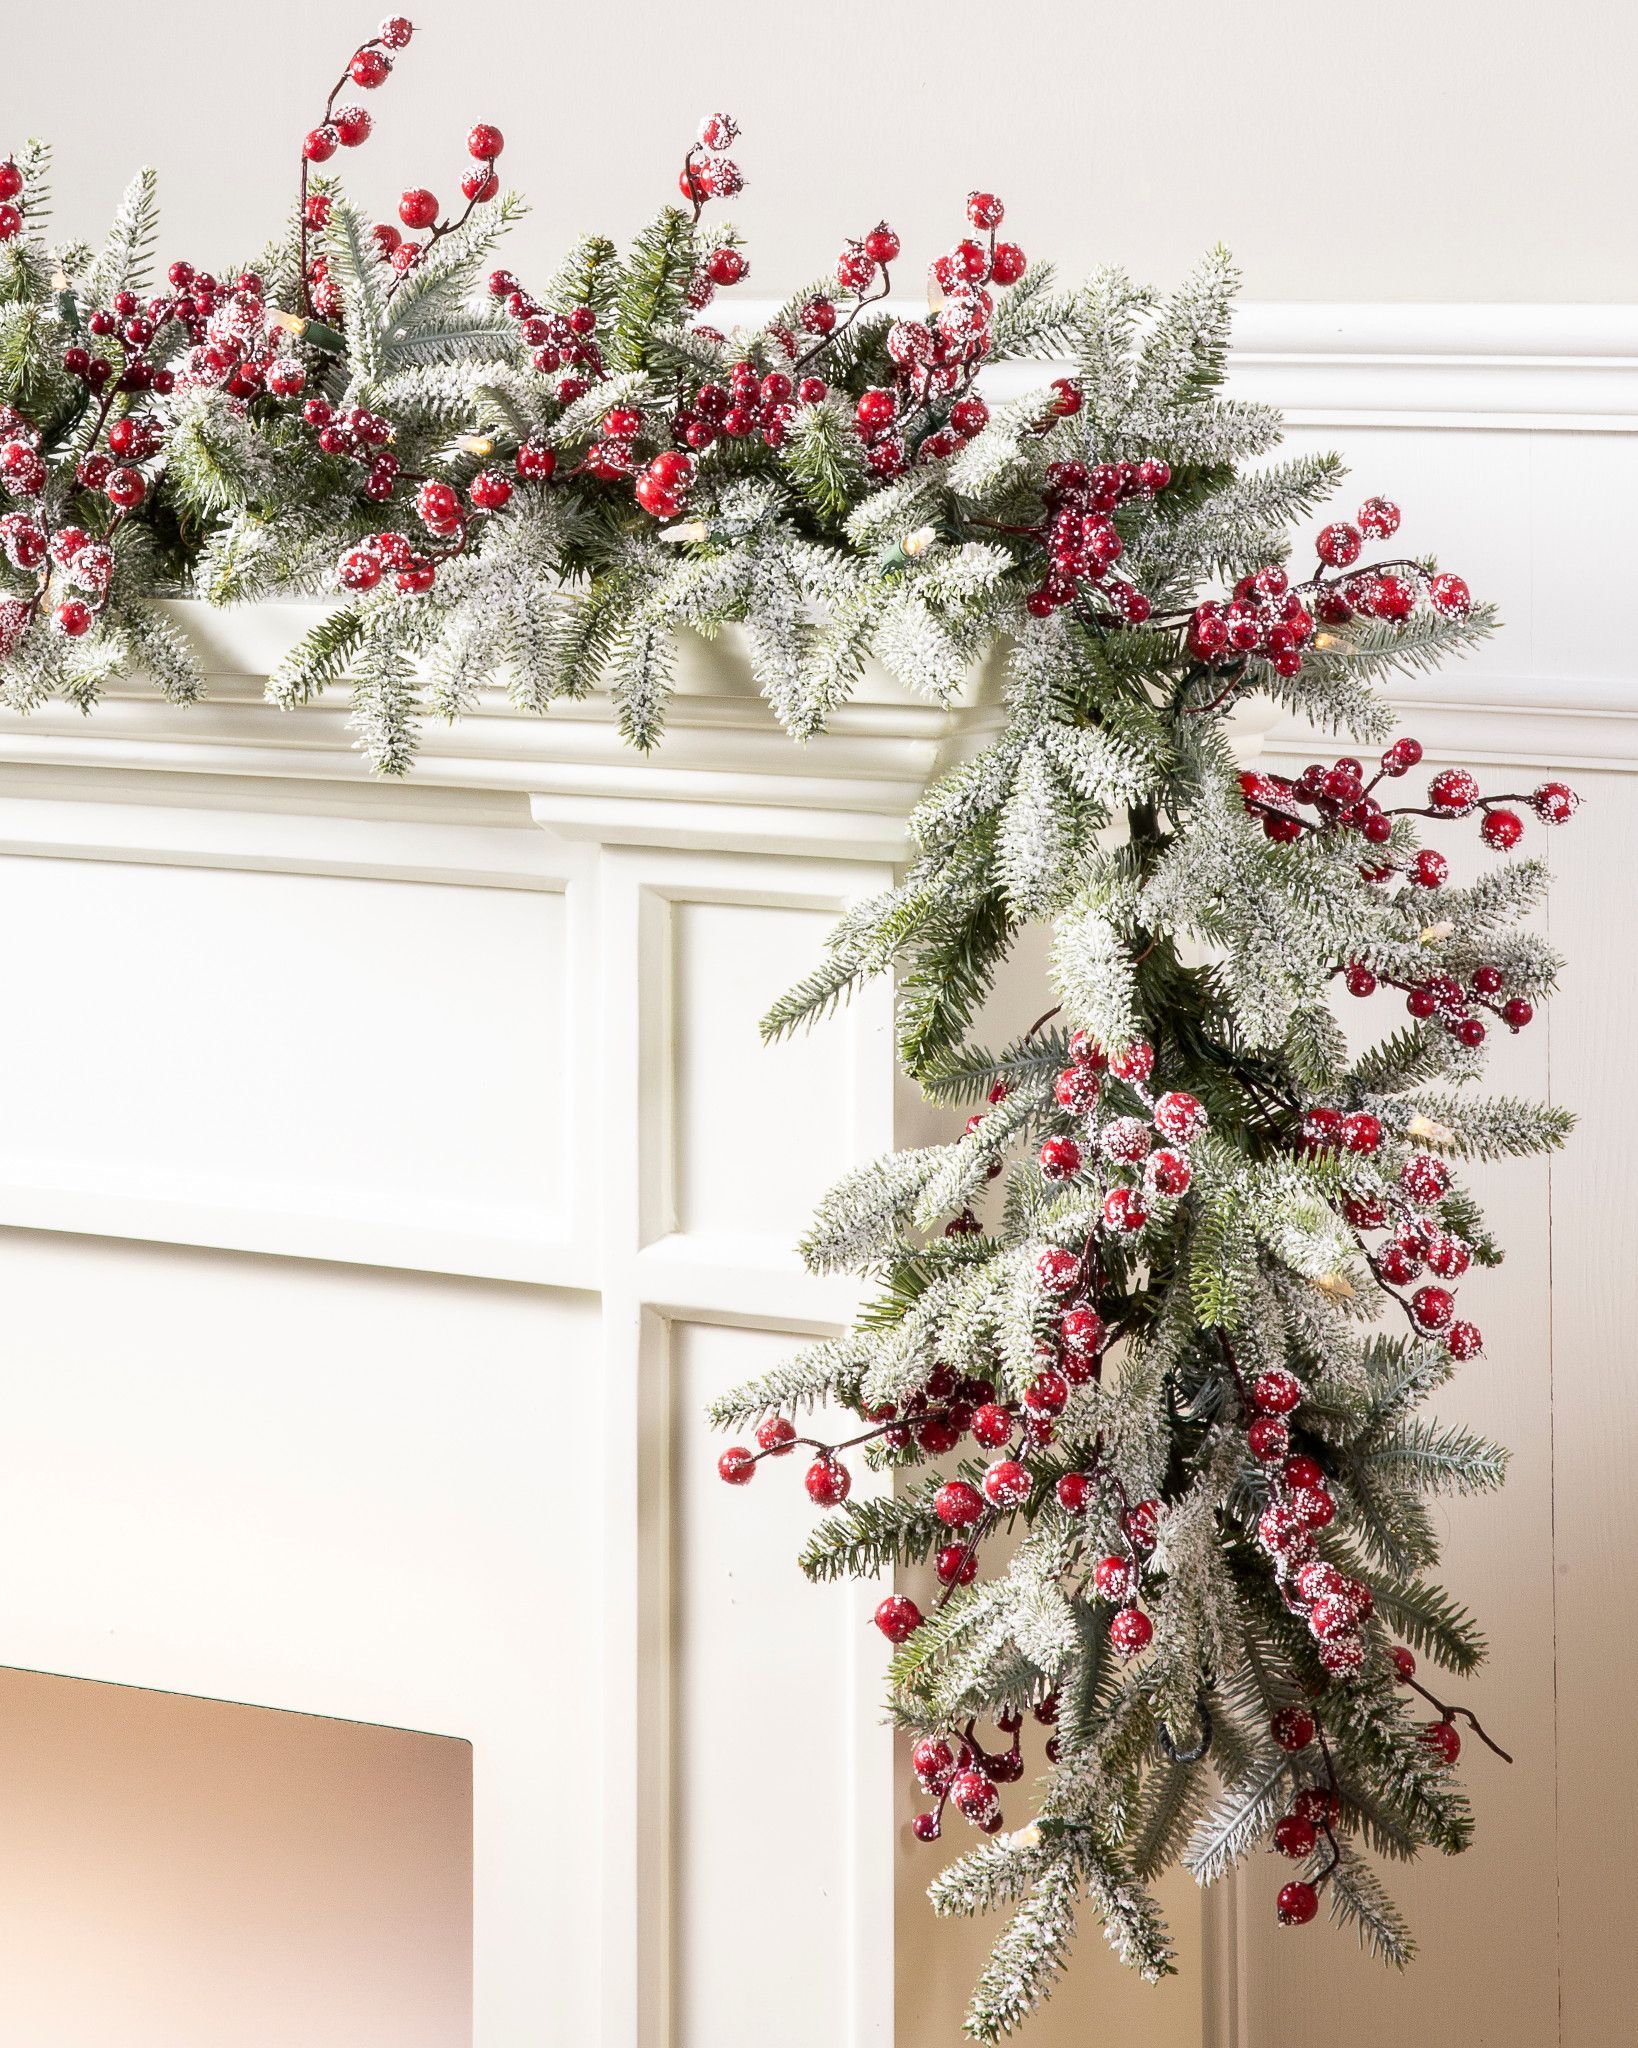 6' Red Berry Frosted Fraser Fir Artificial Christmas Garland, LED Clear by Balsam Hill -   19 christmas decor wreaths & garlands ideas